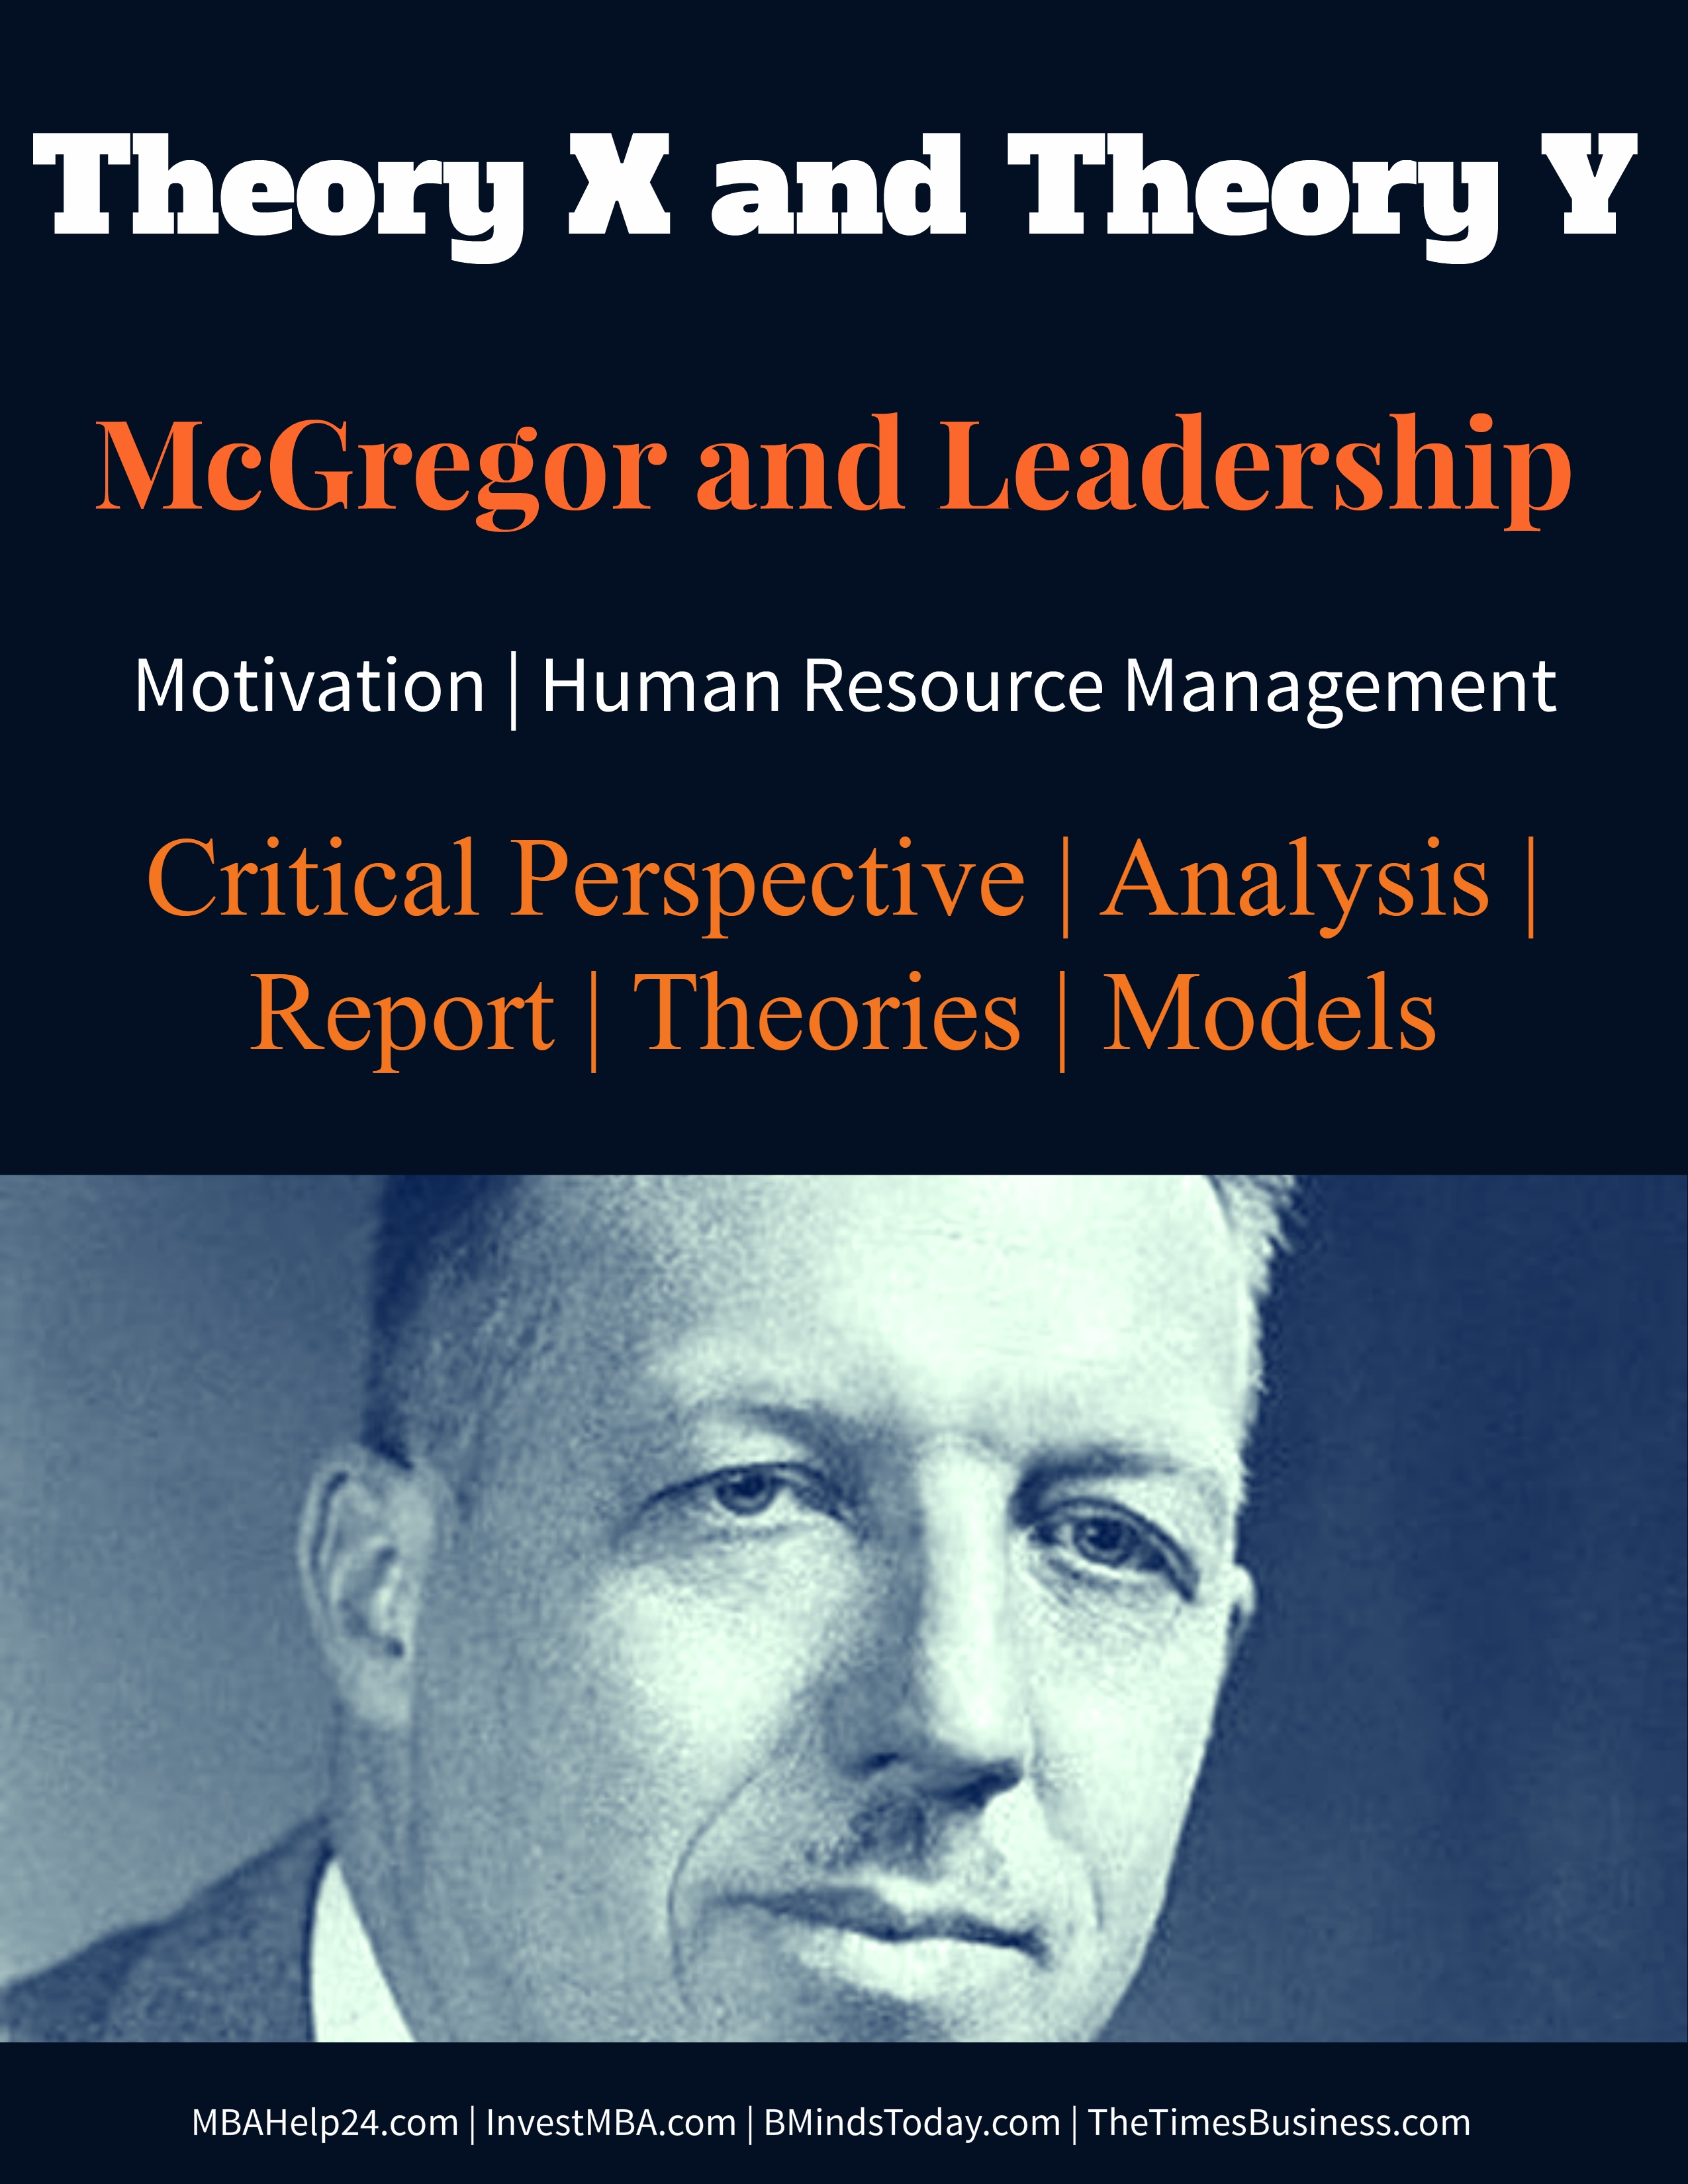 McGregor Theory X and Theory Leadership and motivation theory theory x Theory X and Theory Y | McGregor and Leadership | Motivation | HR McGregor Theory X and Theory Leadership and motivation theory theory x and theory y | mcgregor and leadership | motivation Theory X and Theory Y | McGregor and Leadership | Motivation McGregor Theory X and Theory Leadership and motivation theory